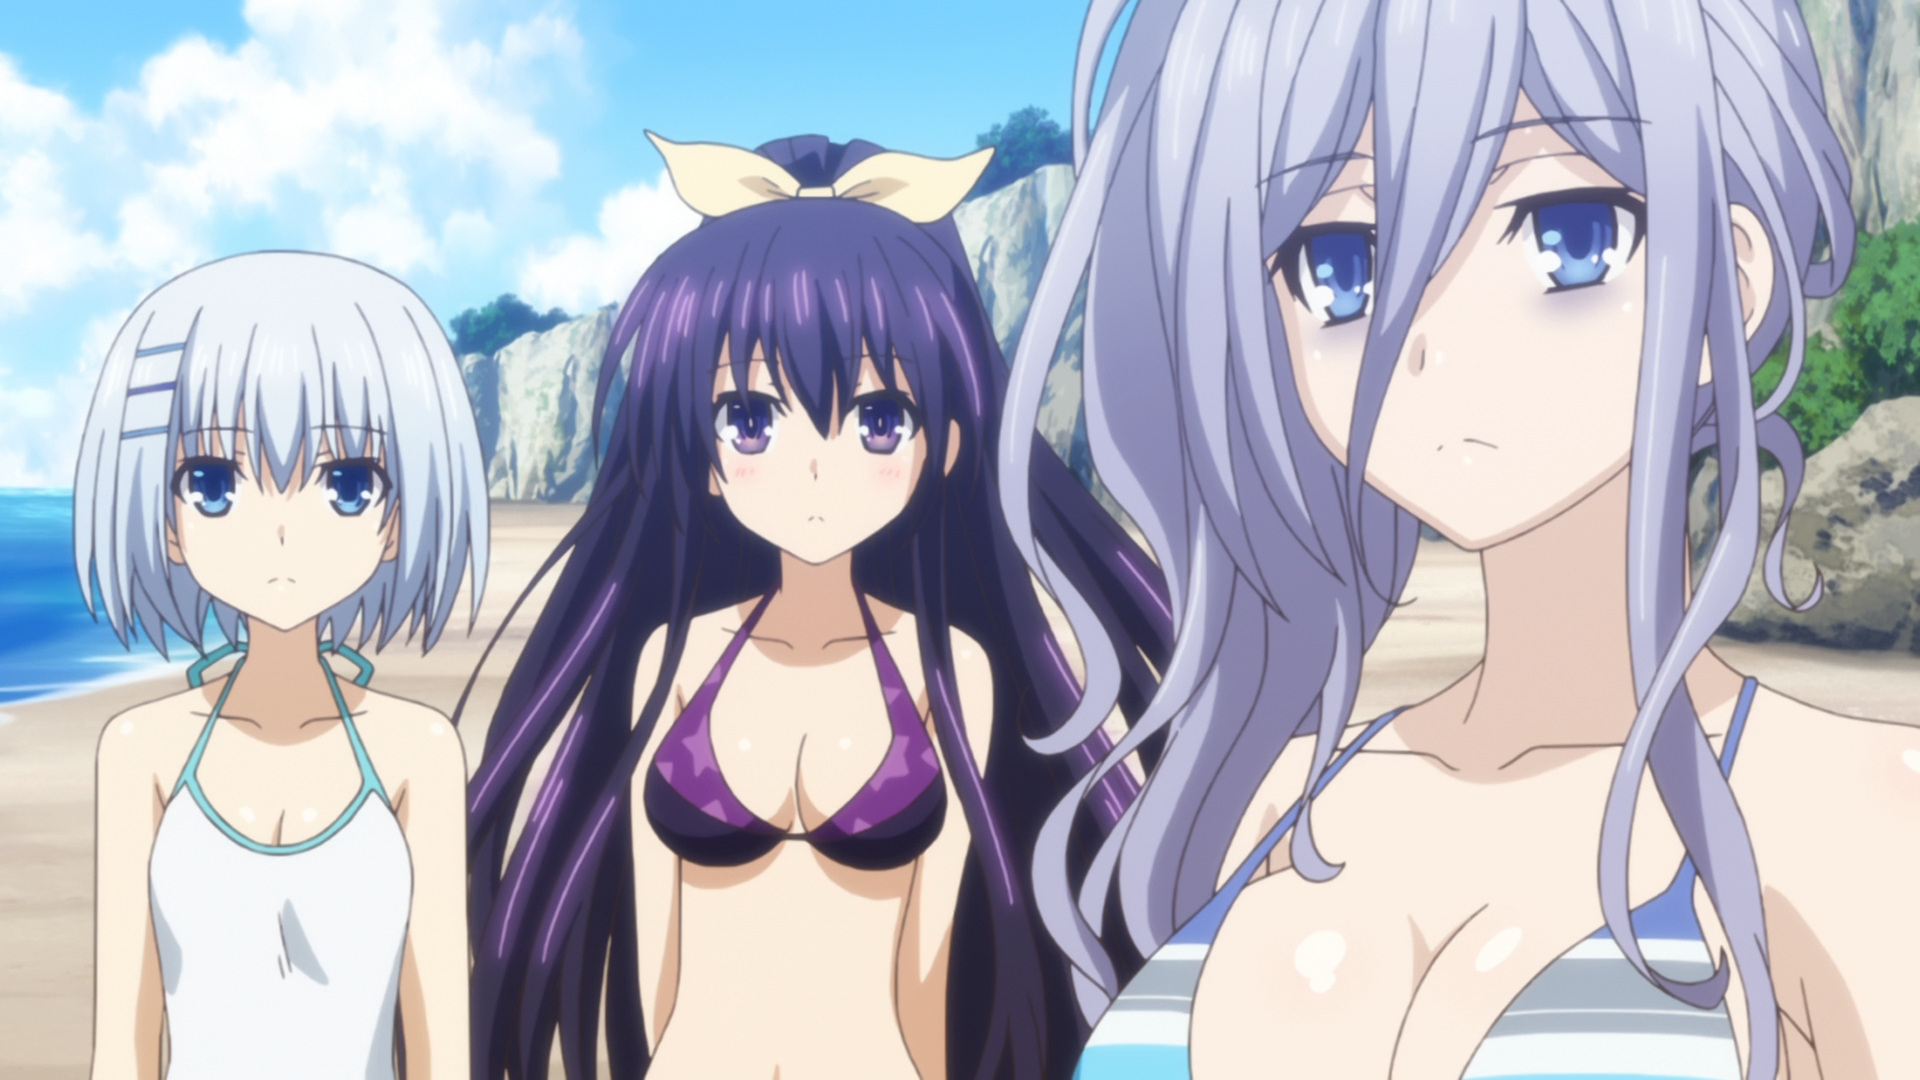 You won’t find any other episode within Date A Live with so much concentrat...